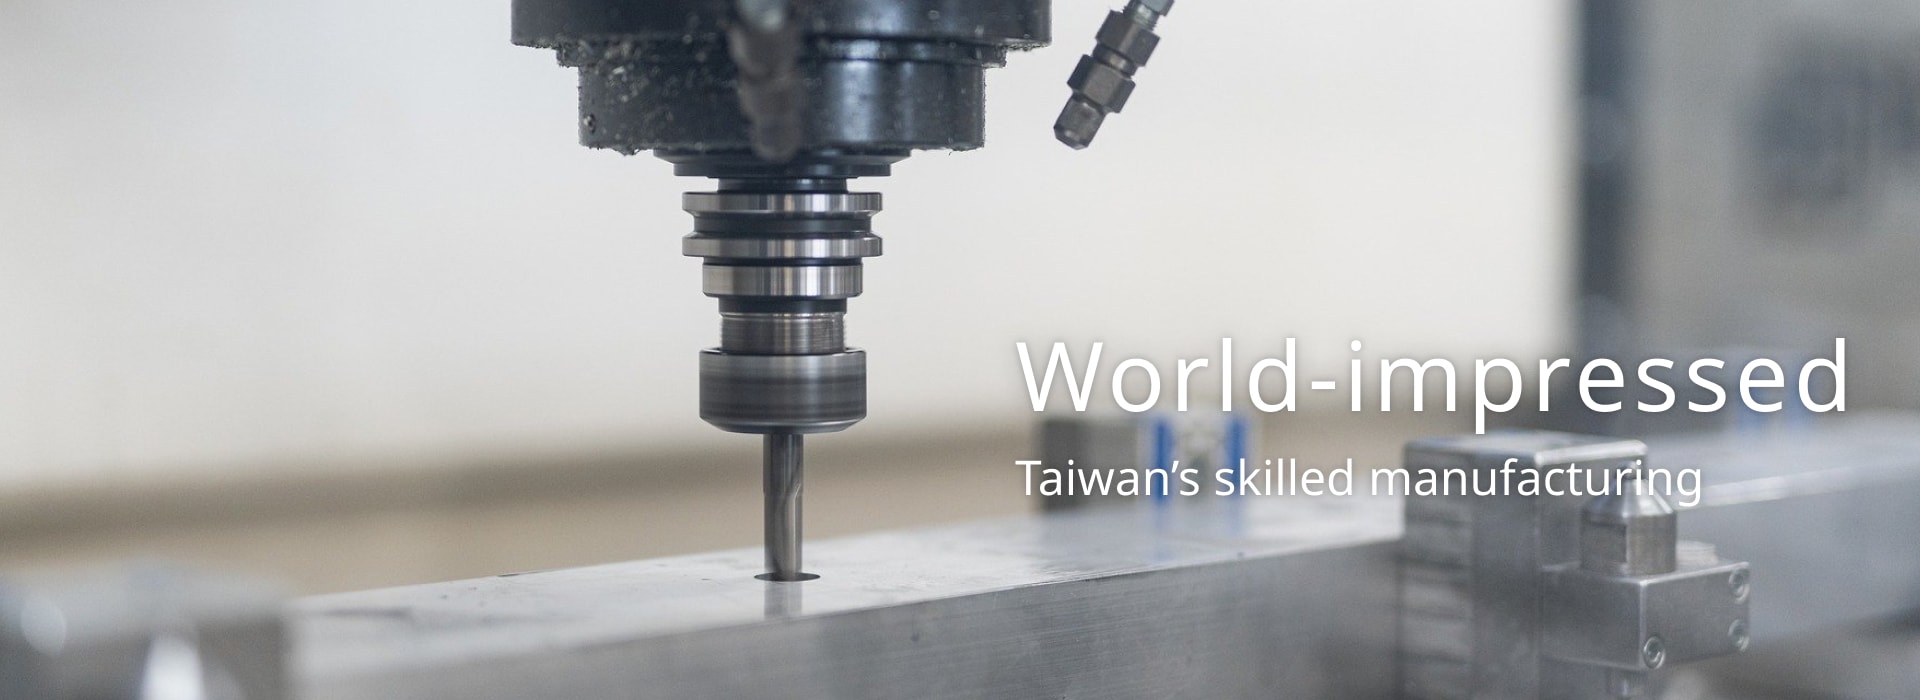 World-impressed Taiwan’s skilled manufacturing